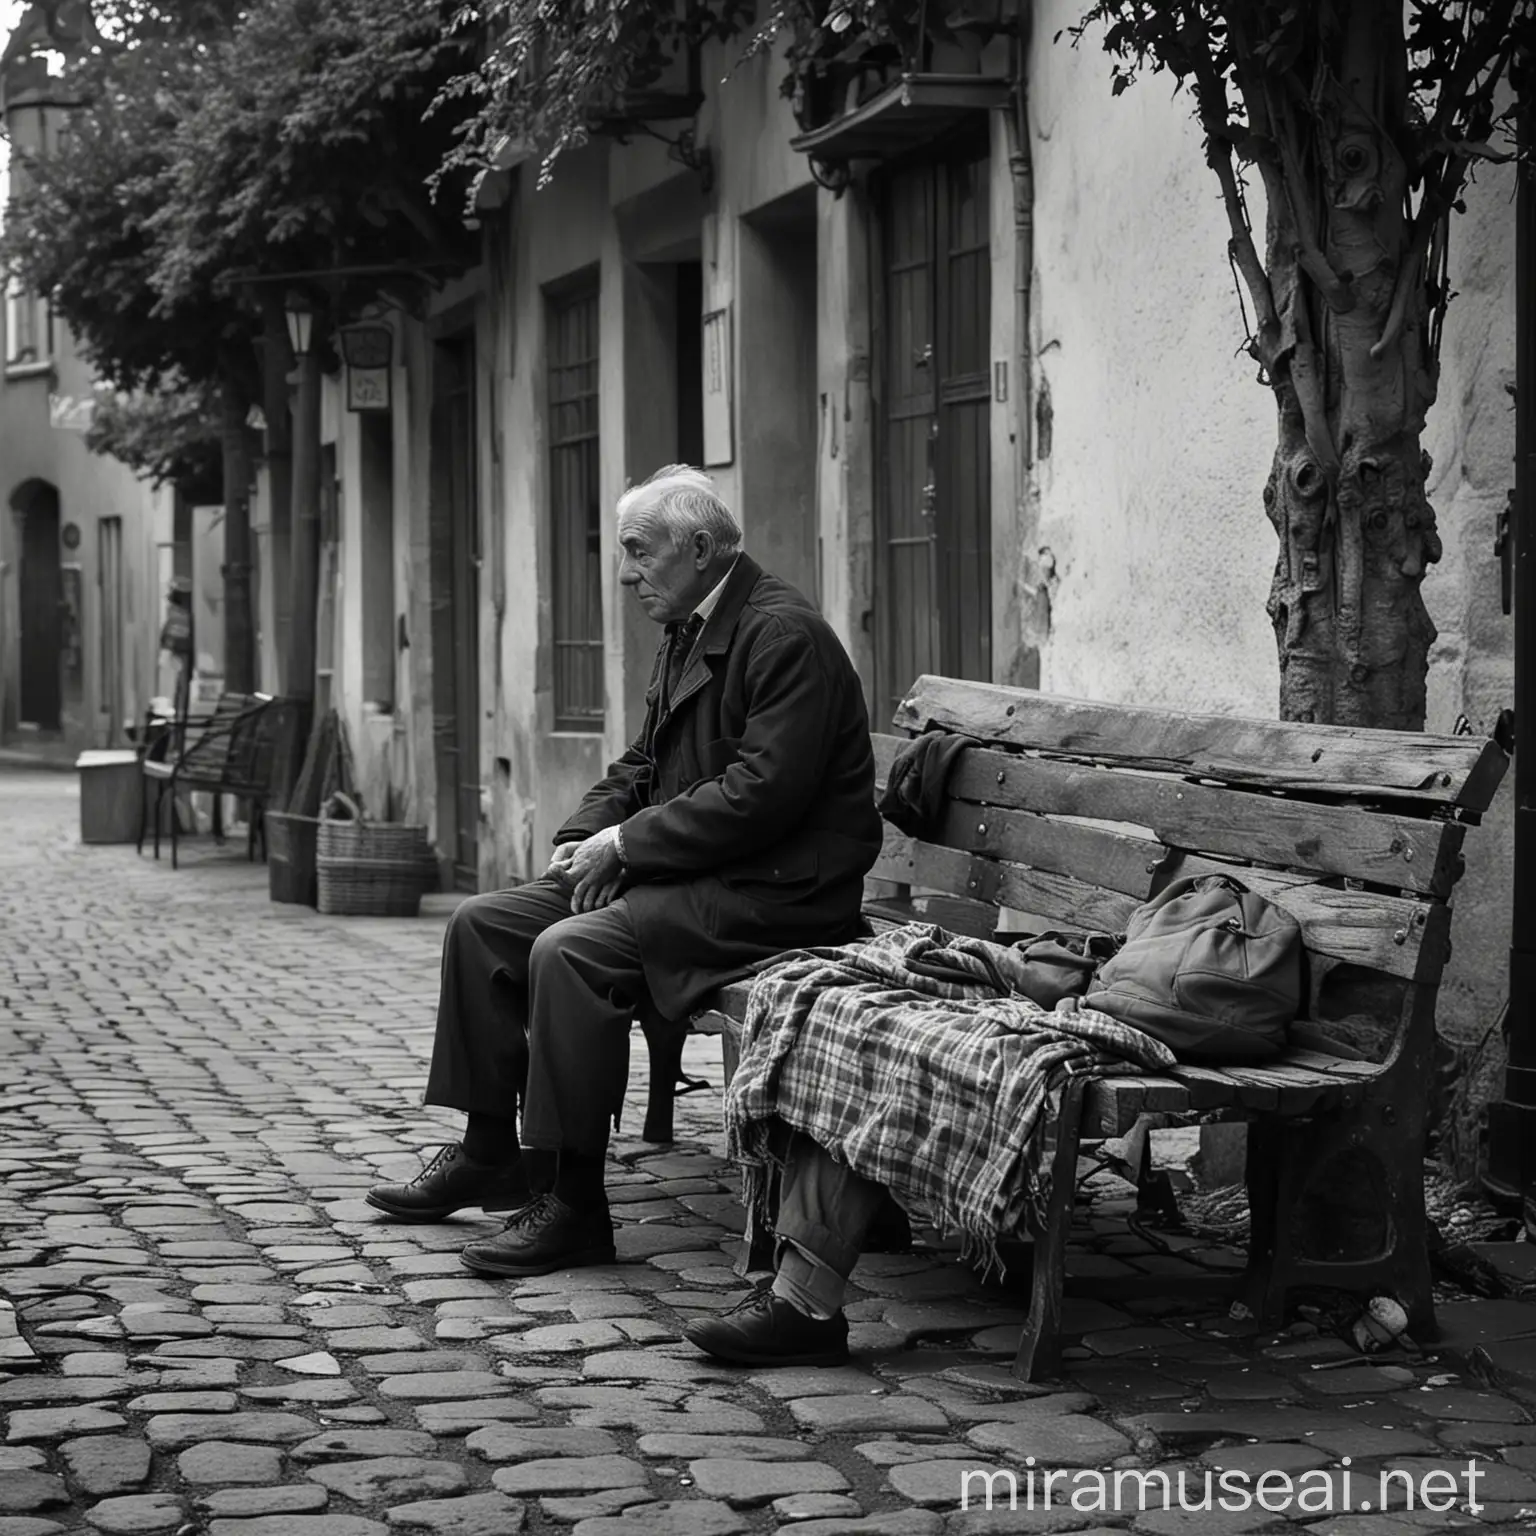 Village Square Old Man on Bench in Colorful Scene with Nostalgic Touch